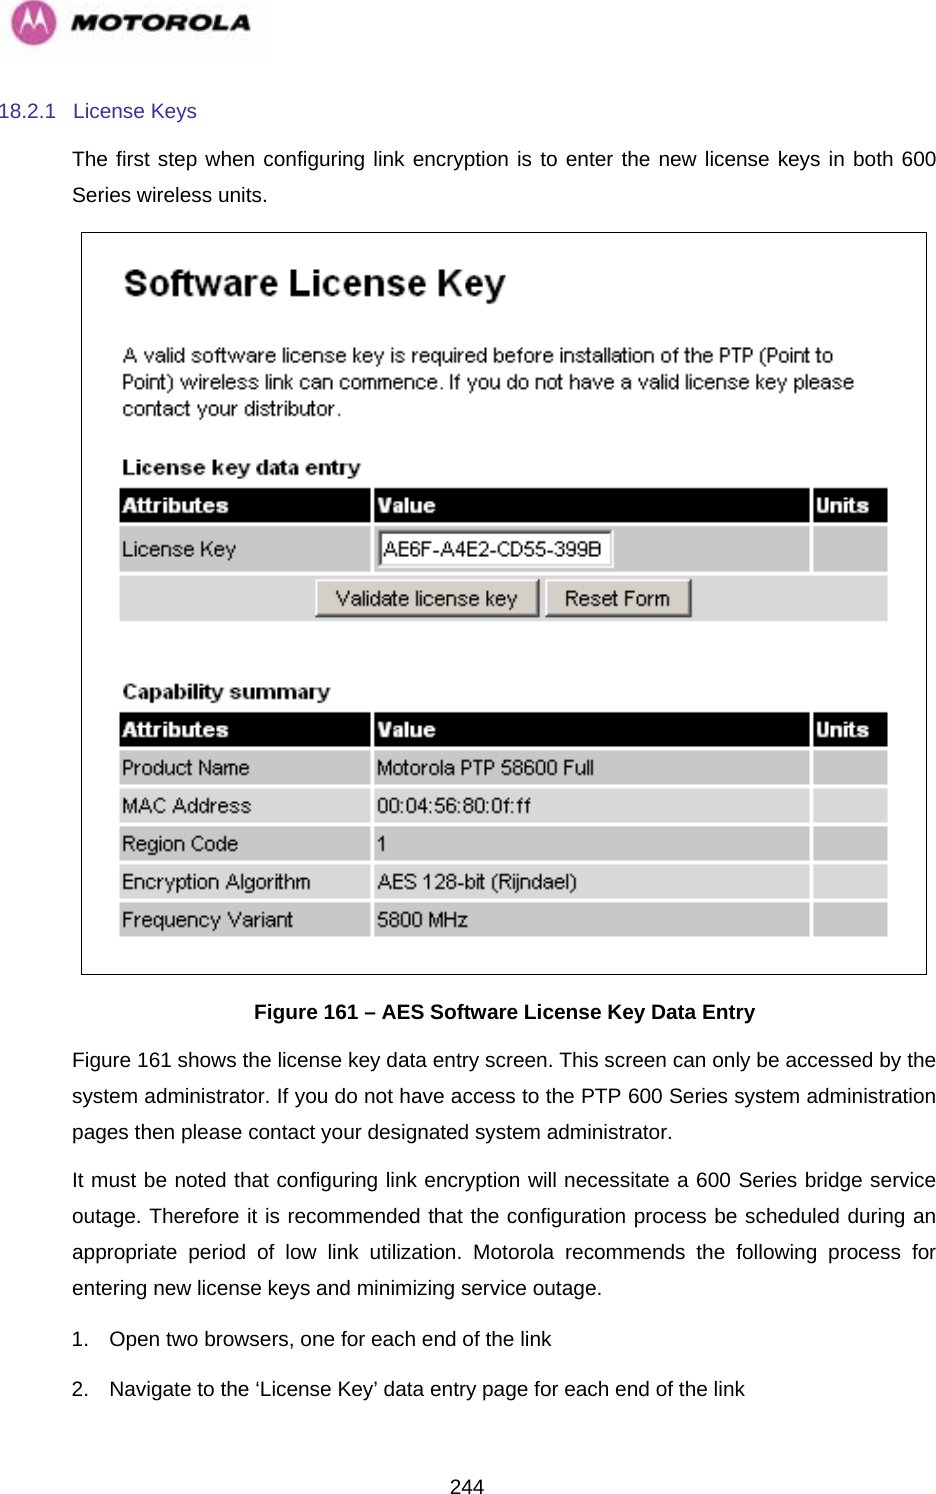   24418.2.1 License Keys The first step when configuring link encryption is to enter the new license keys in both 600 Series wireless units.  Figure 161 – AES Software License Key Data Entry Figure 161 shows the license key data entry screen. This screen can only be accessed by the system administrator. If you do not have access to the PTP 600 Series system administration pages then please contact your designated system administrator.  It must be noted that configuring link encryption will necessitate a 600 Series bridge service outage. Therefore it is recommended that the configuration process be scheduled during an appropriate period of low link utilization. Motorola recommends the following process for entering new license keys and minimizing service outage. 1.  Open two browsers, one for each end of the link 2.  Navigate to the ‘License Key’ data entry page for each end of the link 